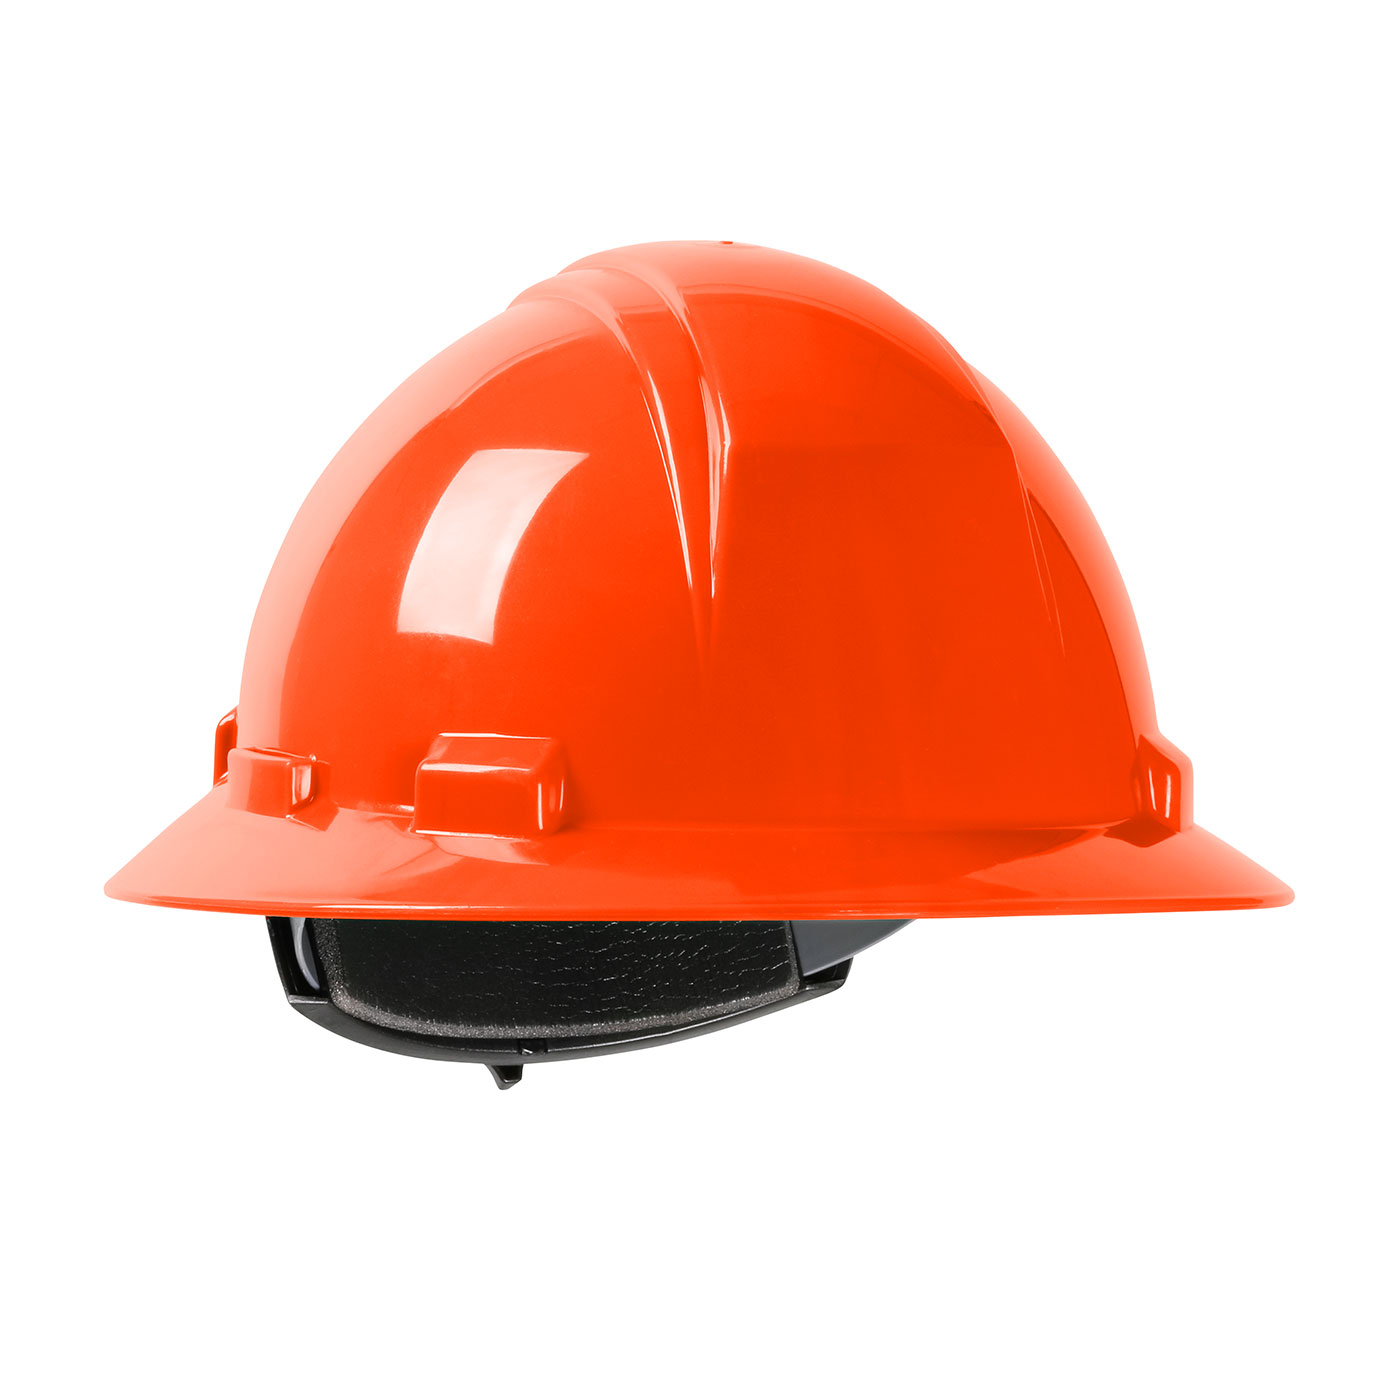 280-HP261R PIP® Dynamic Kilimanjaro™ Full Brim Hard Hat with HDPE Shell, 4-Point Textile Suspension and Wheel Ratchet Adjustment - Orange